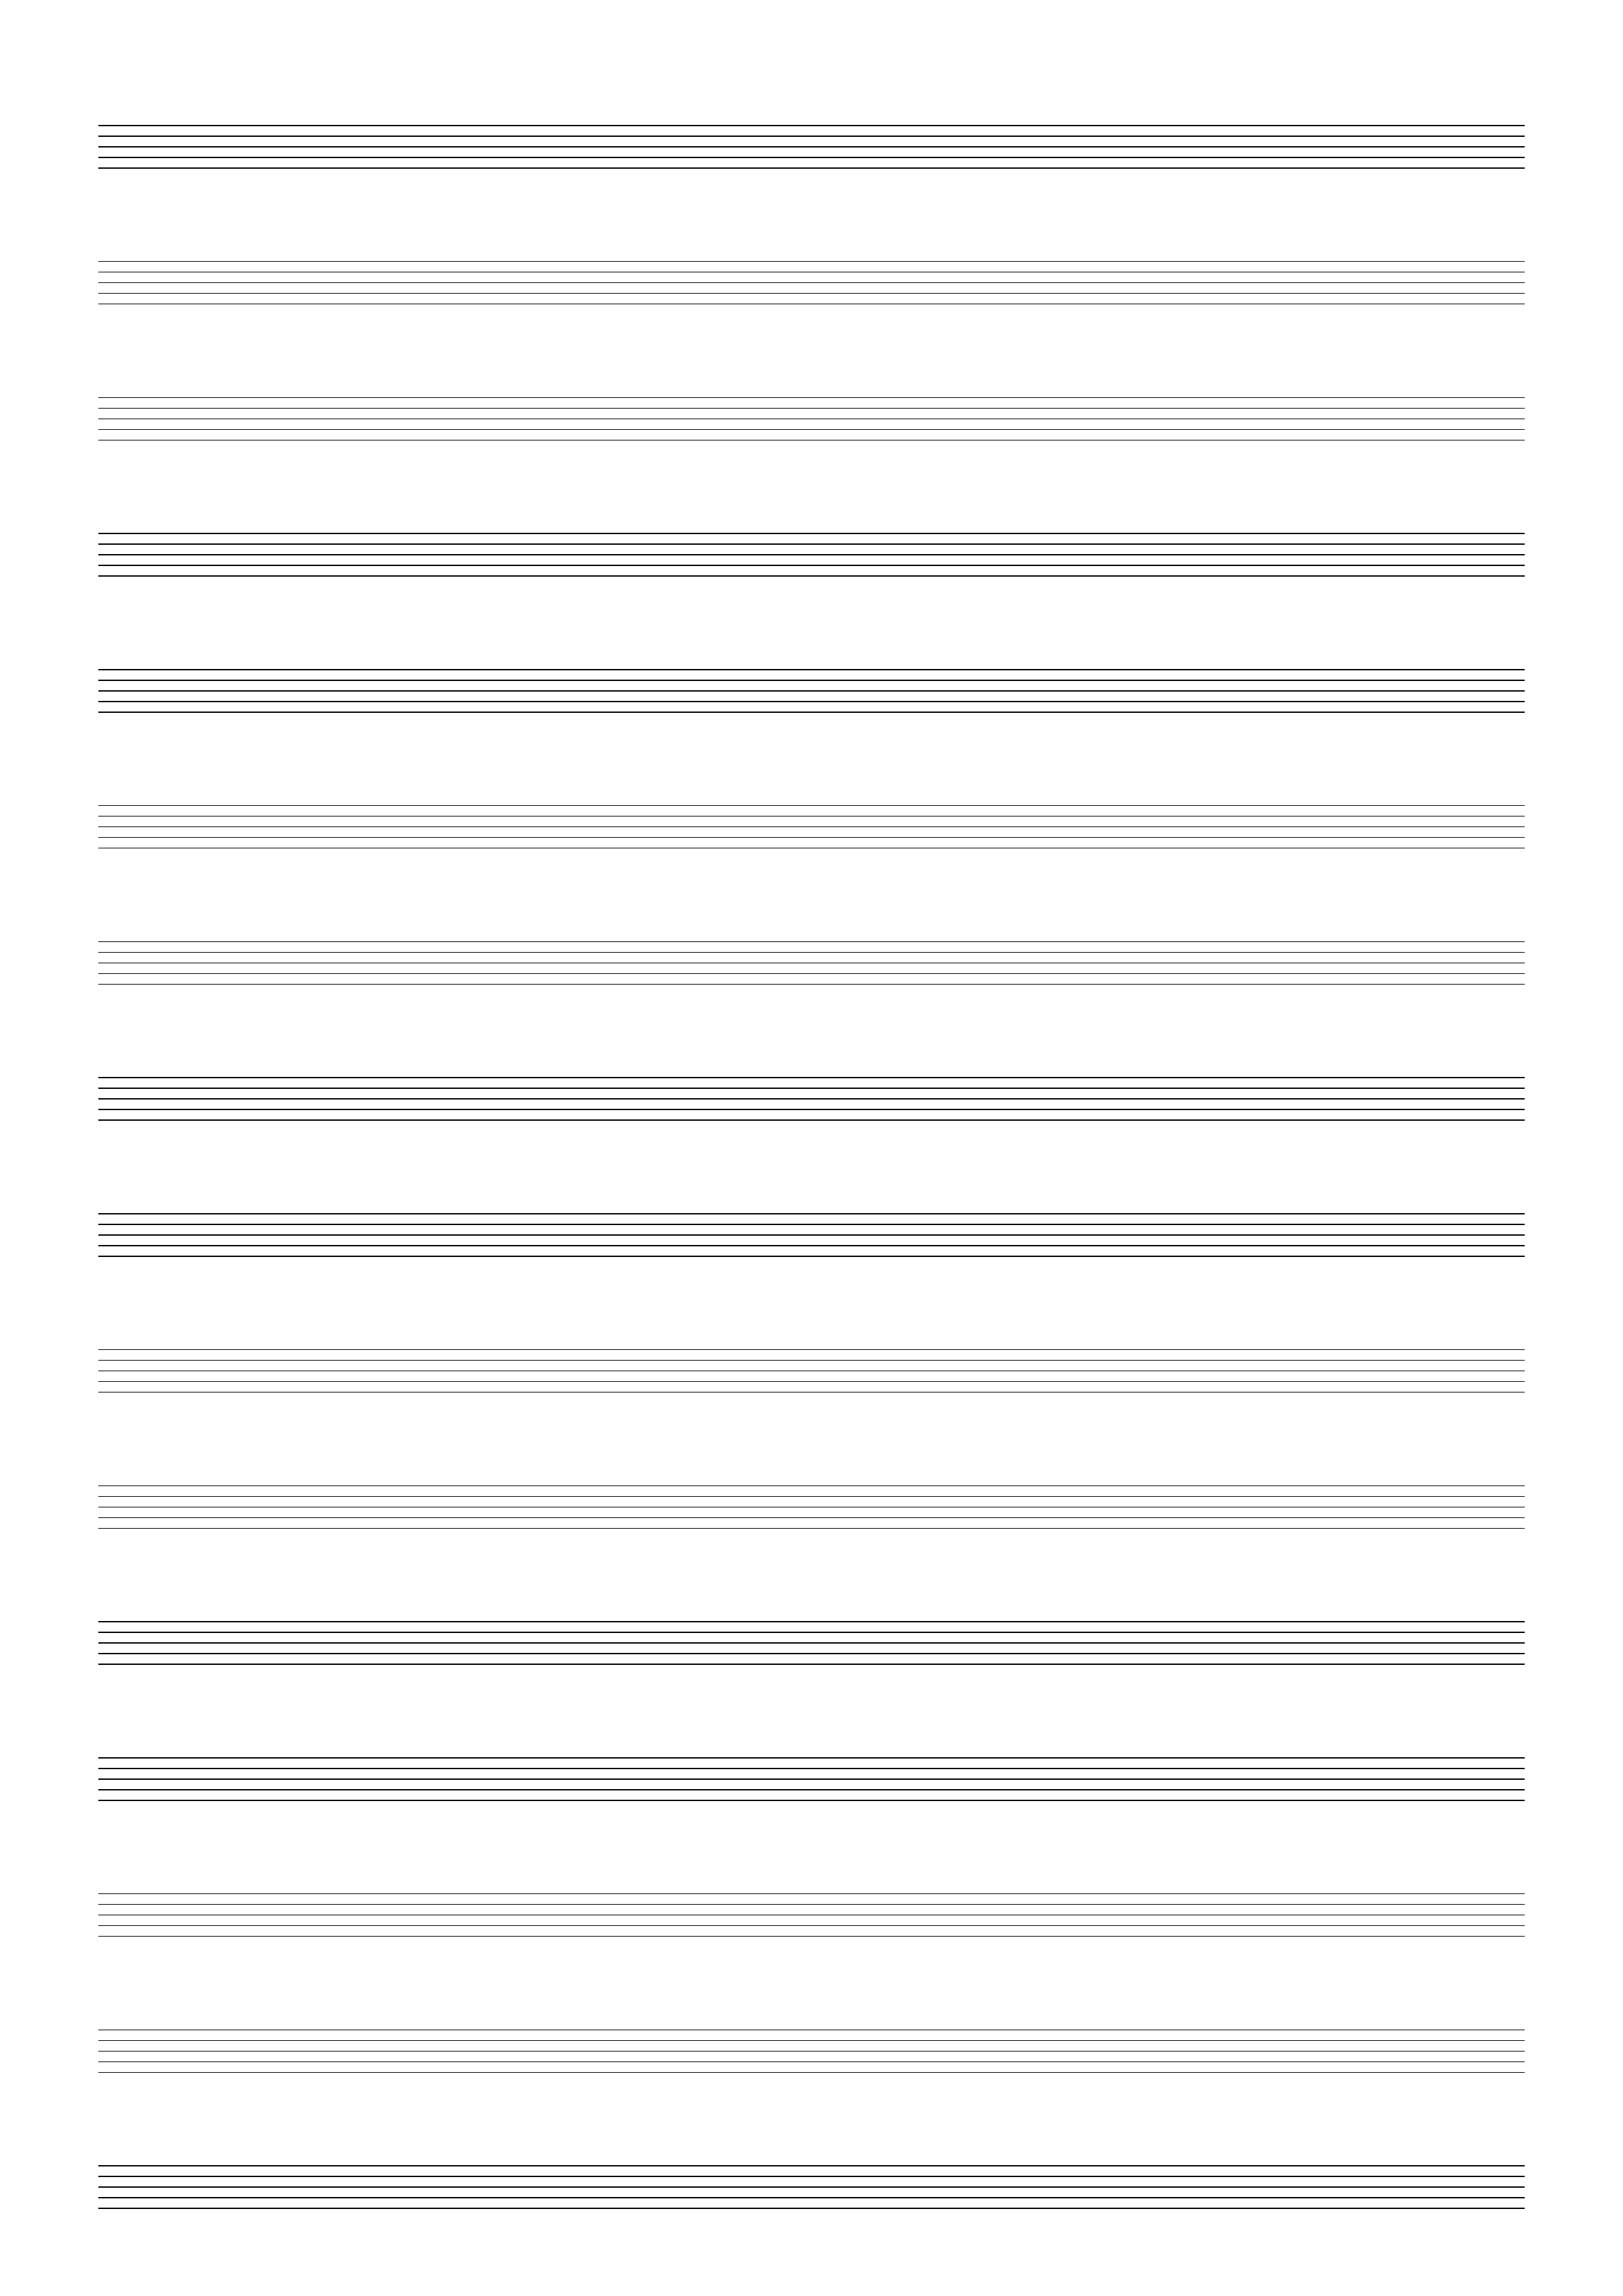 Blank Grand Staff Paper - With and Without Barlines - Print as